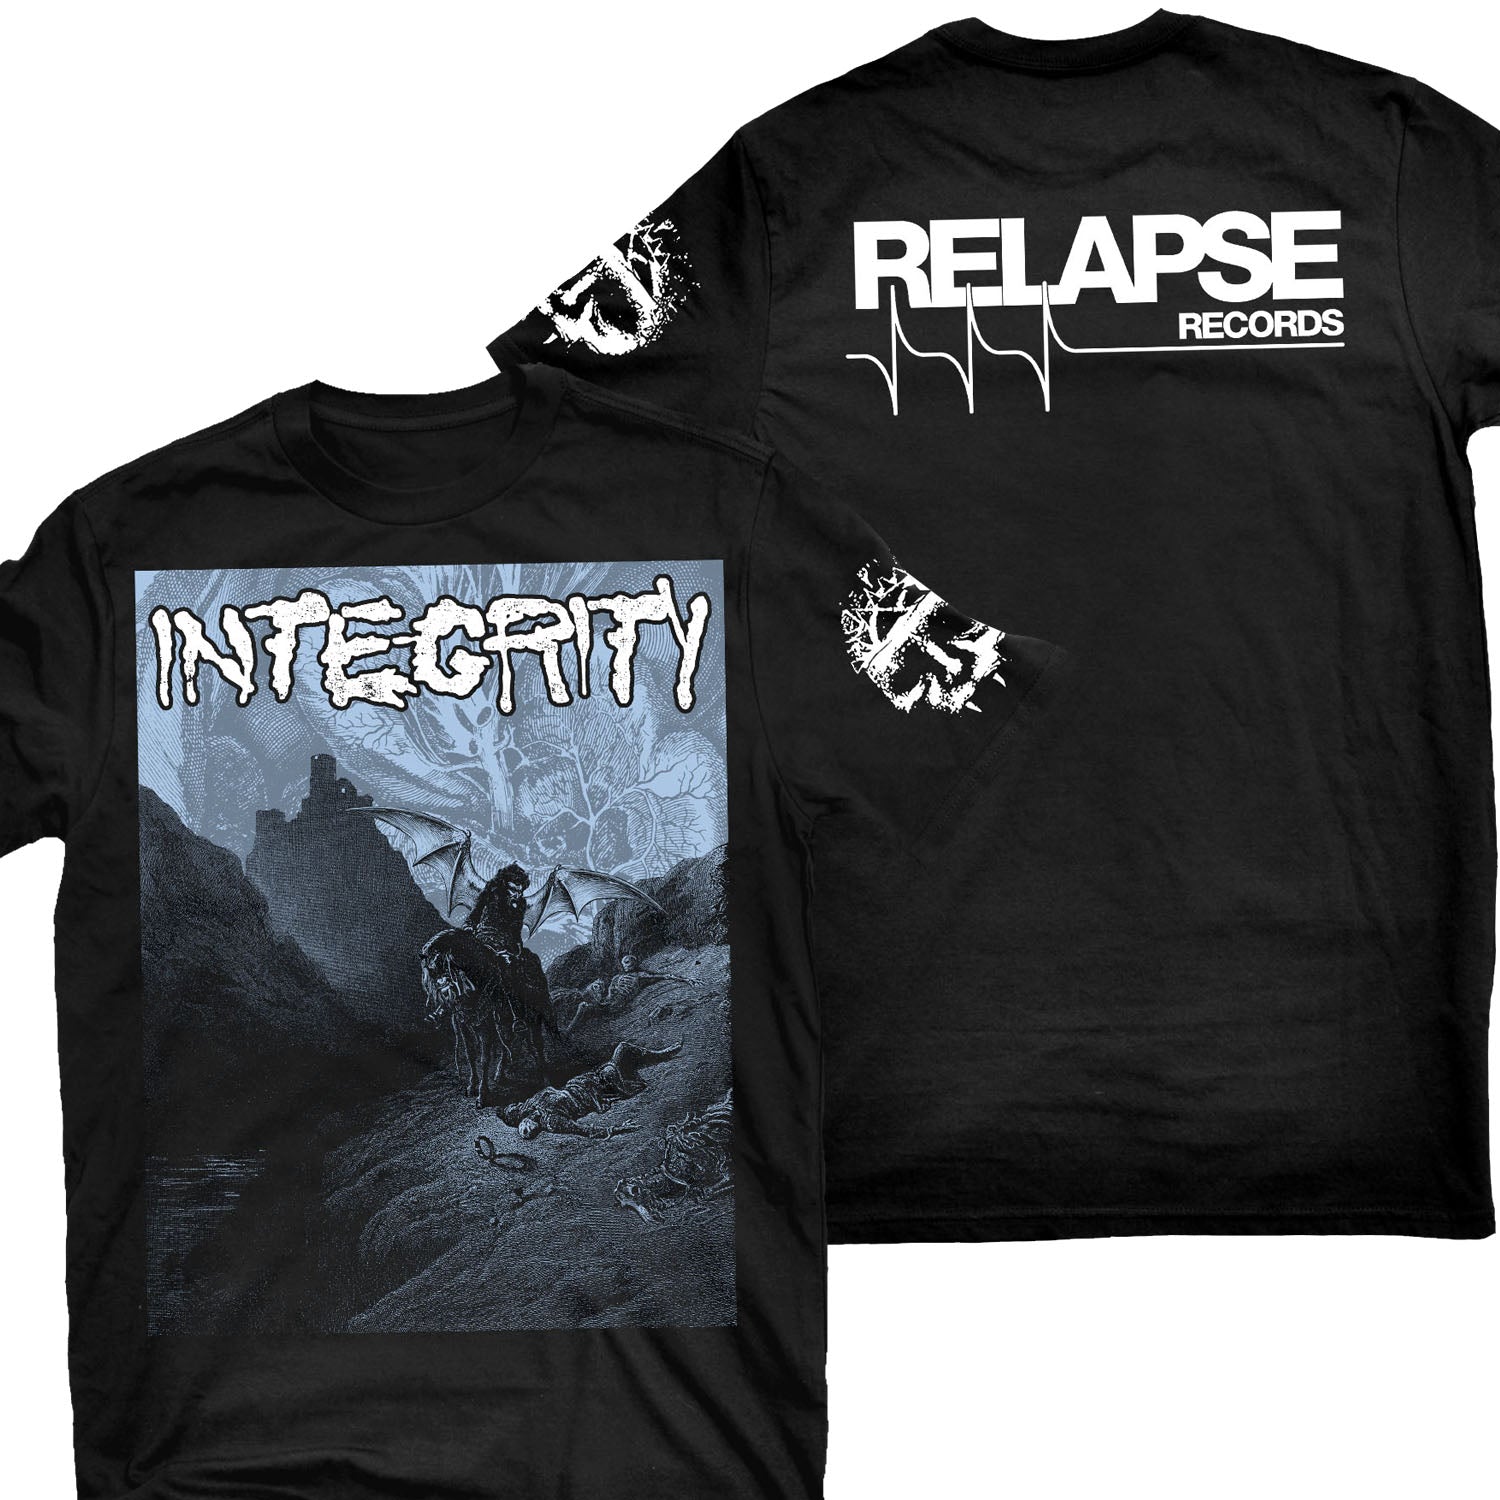 Integrity "Howling, For The Nightmare Shall Consume" T-Shirt